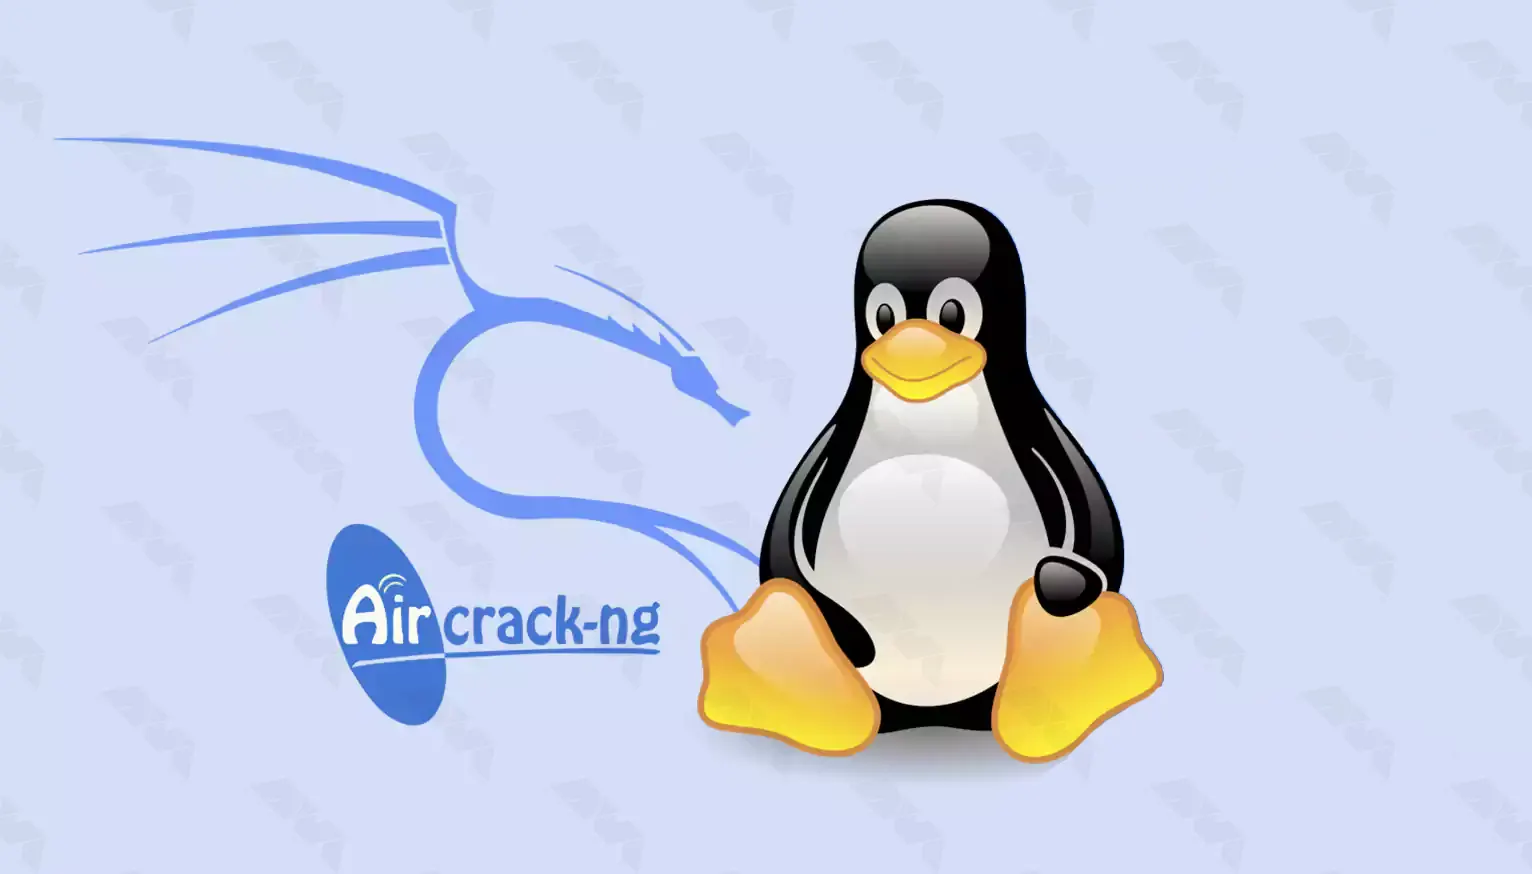 A security tool for penetration testing - How to Install Aircrack-ng on Kali Linux